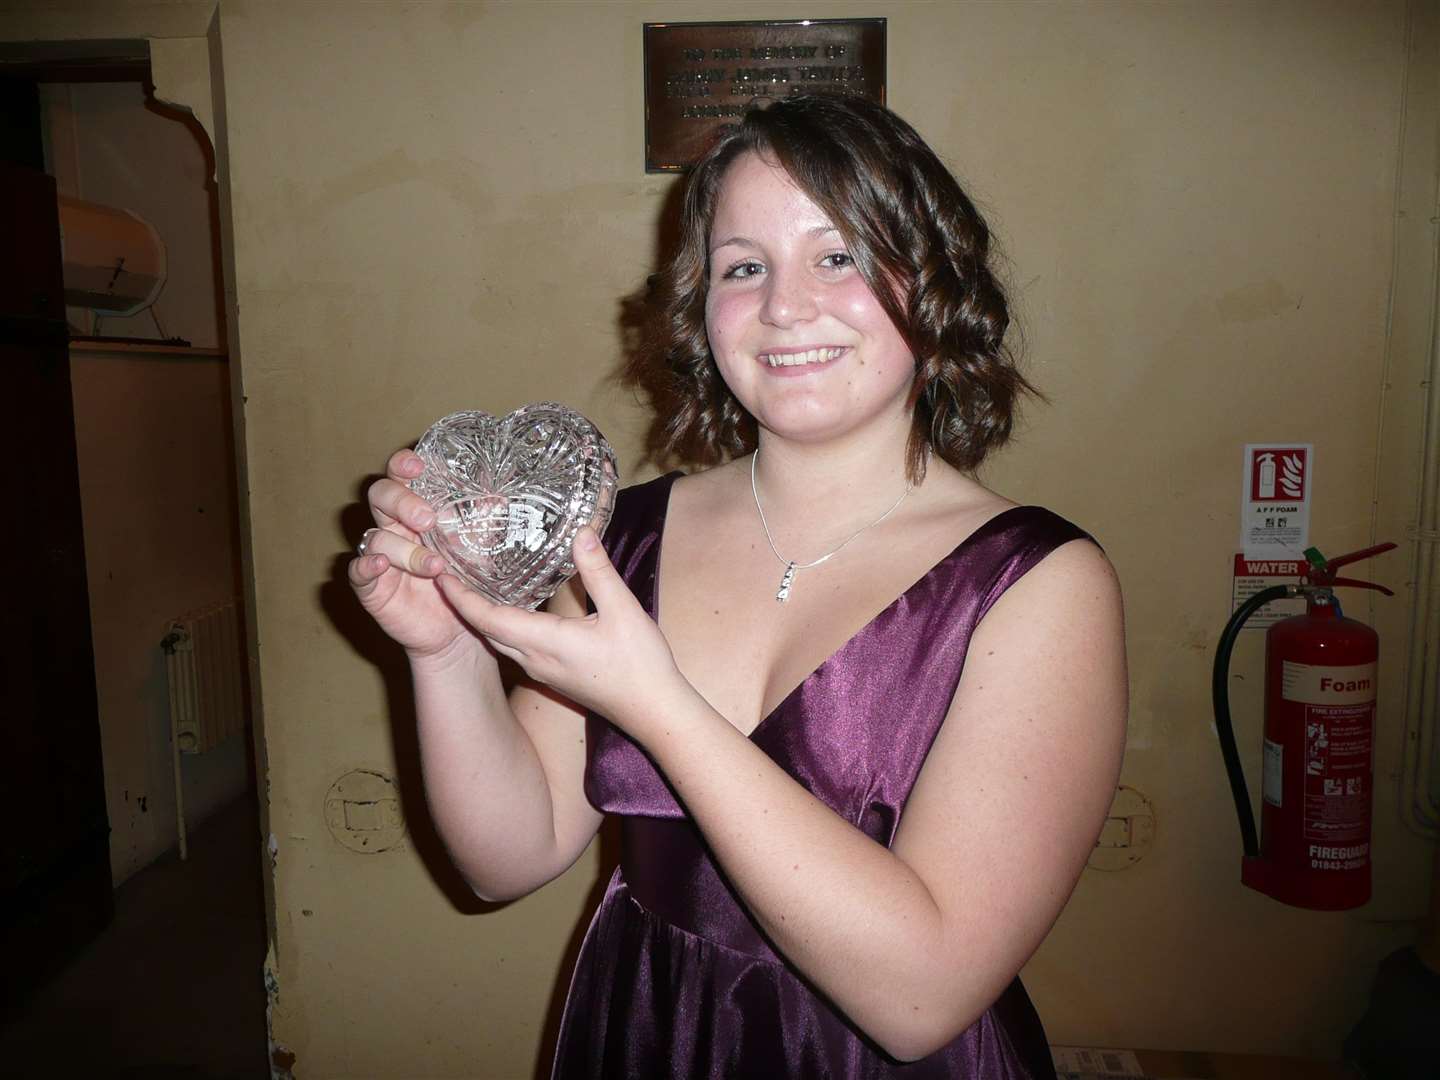 Megan Forbes received a Channel swimming award in 2008